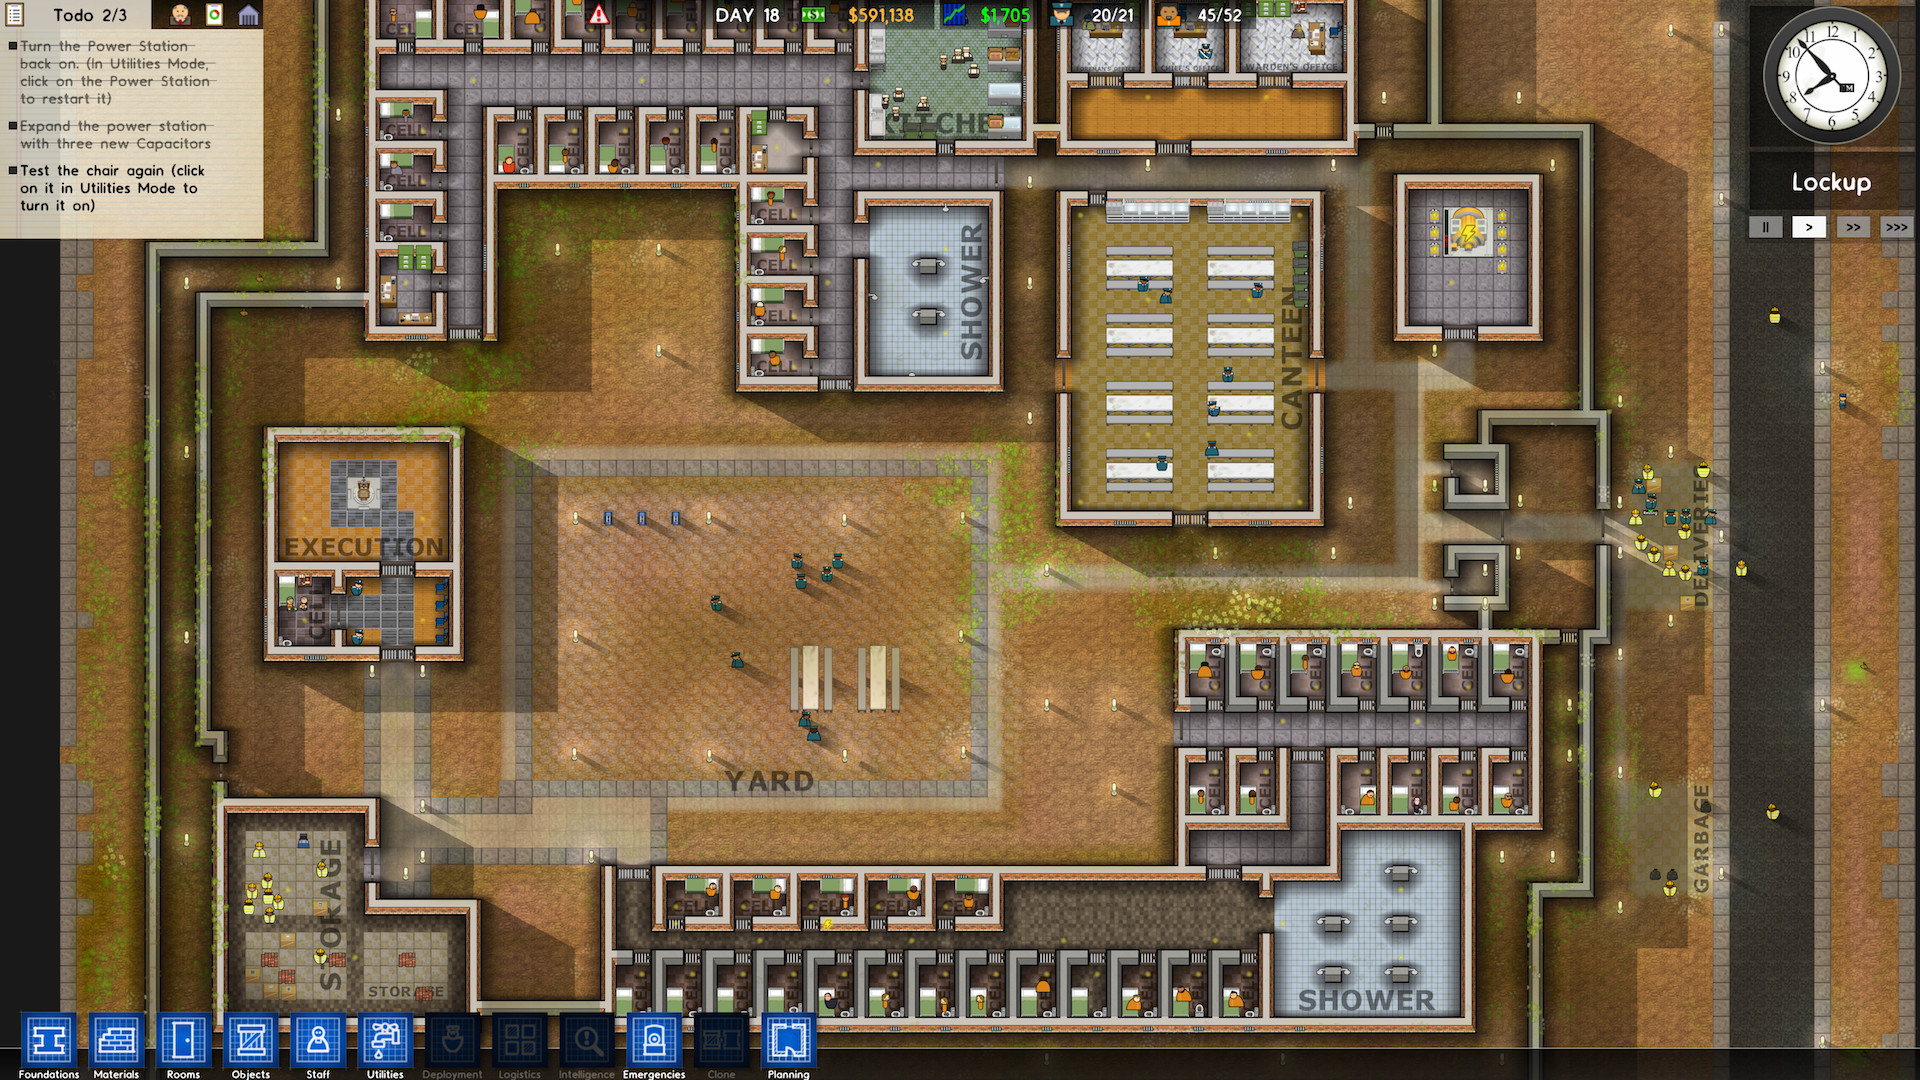 10. "Prison Architect" easter egg: Secret character with blue hair hidden in the game - wide 3